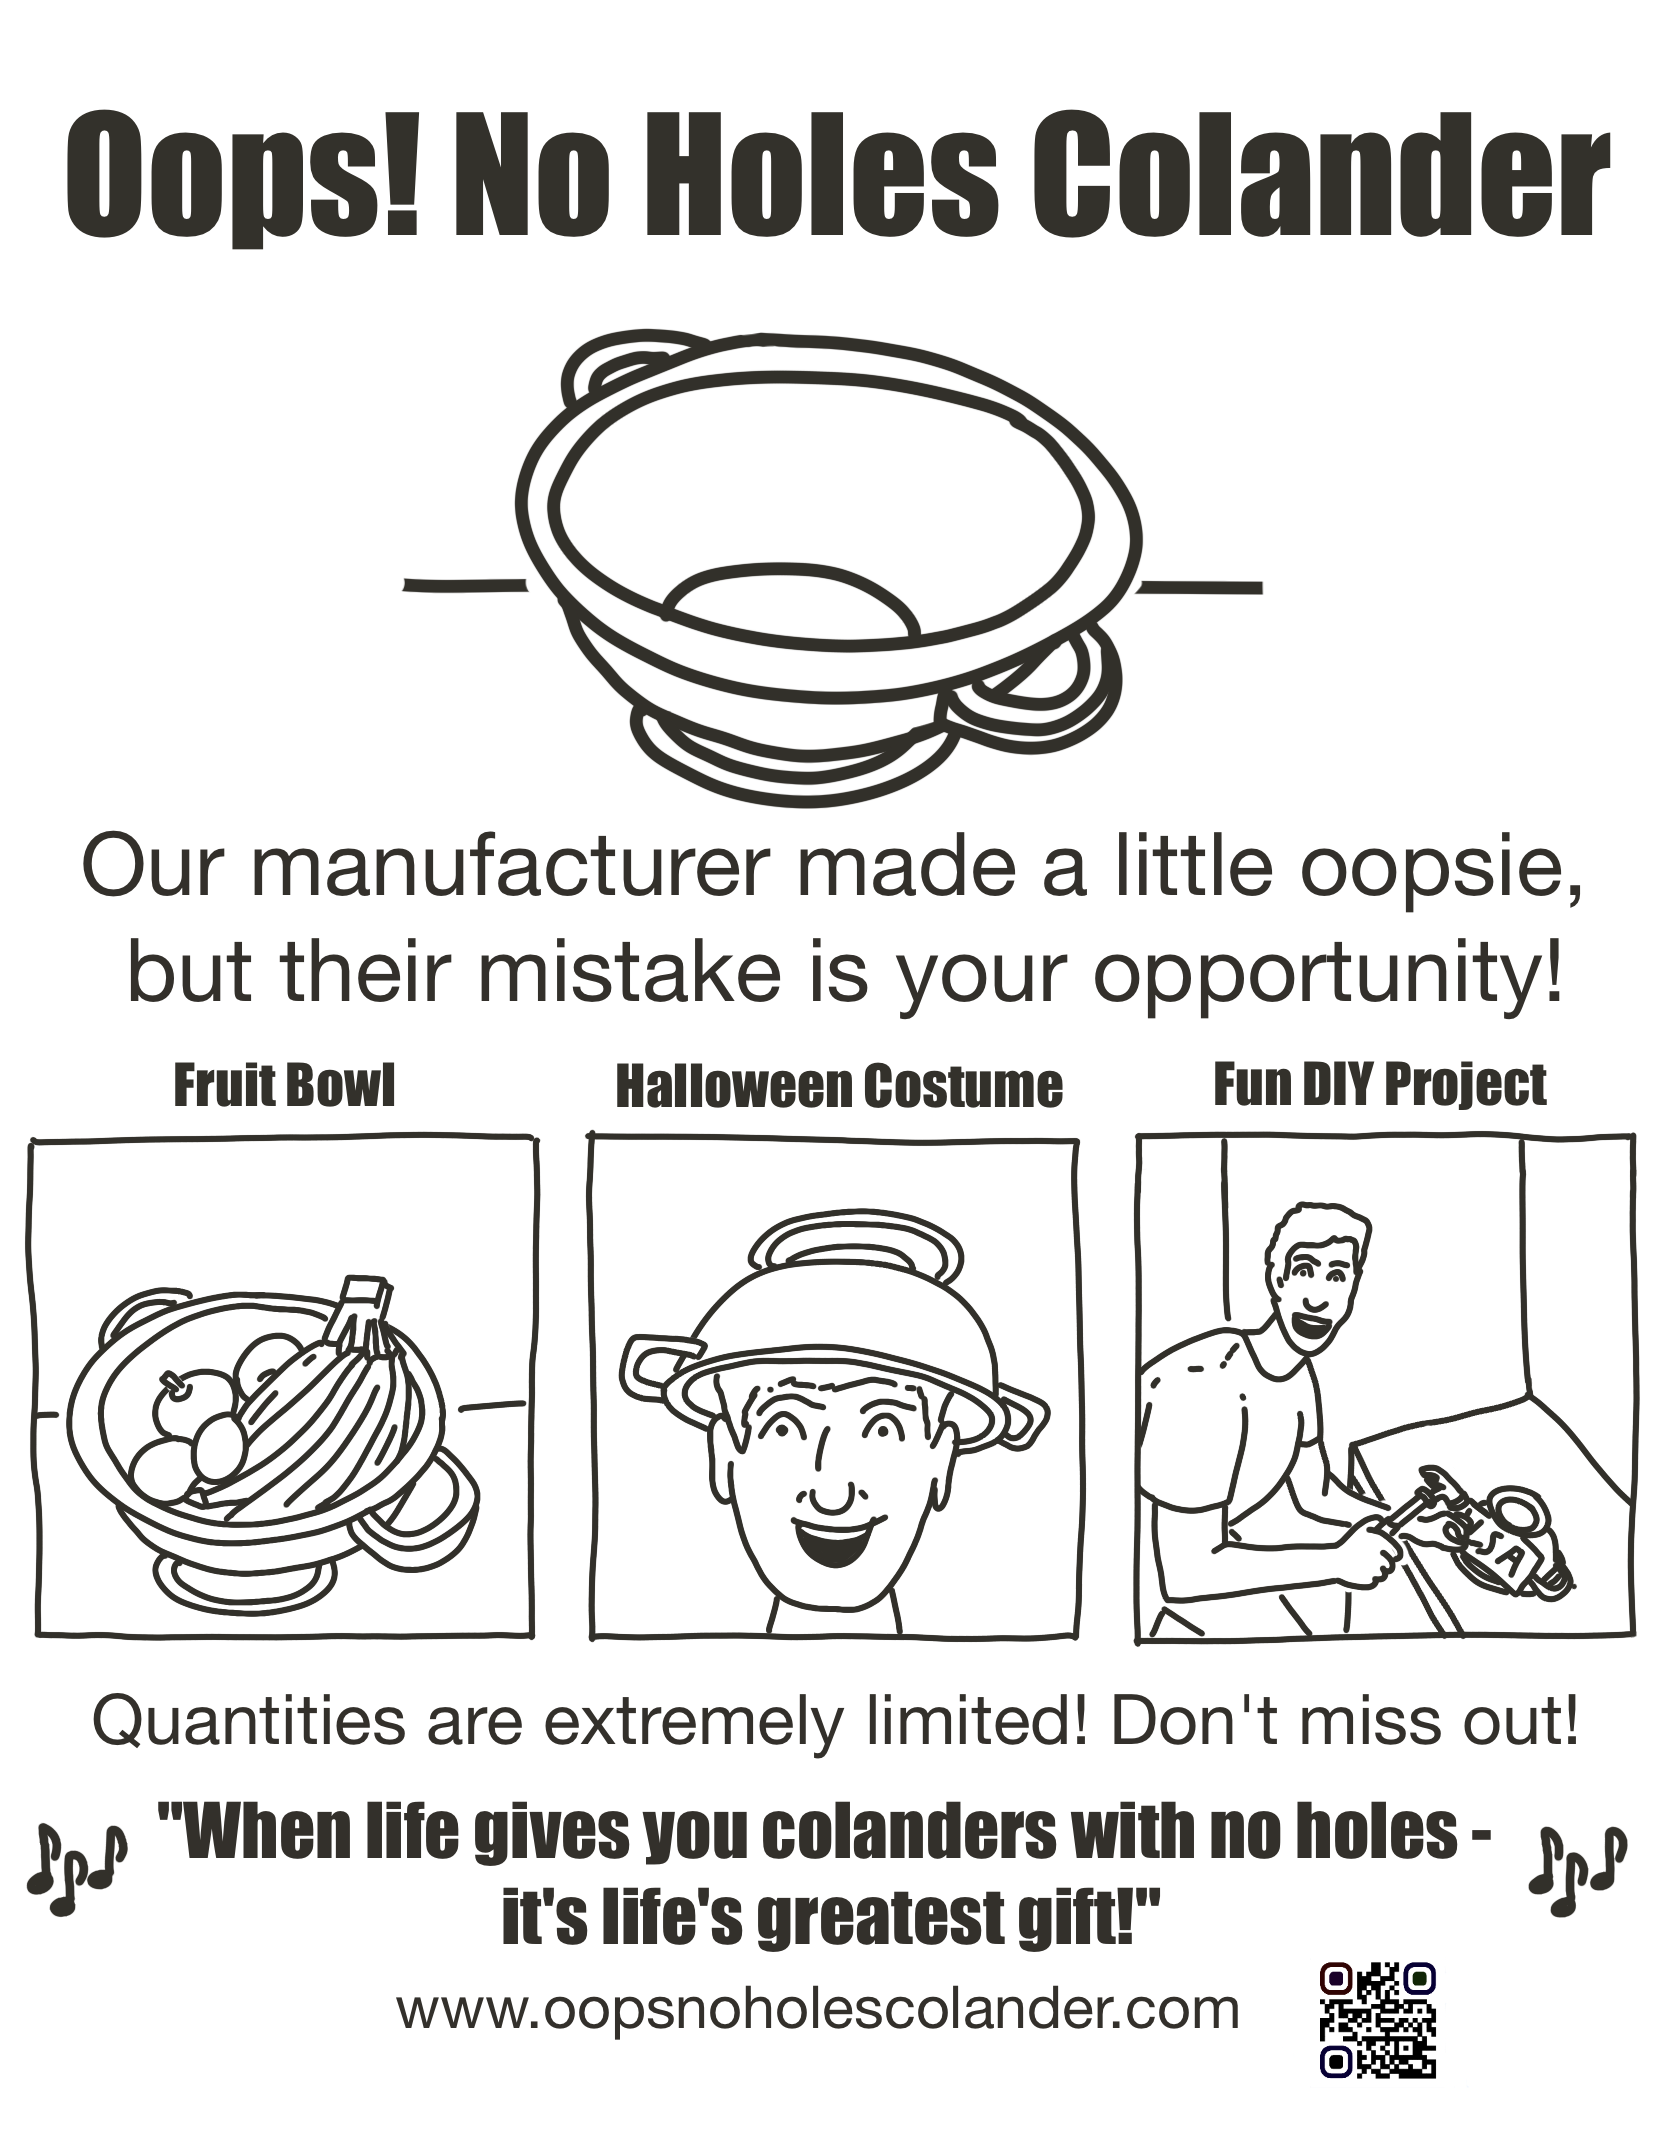 Advertisement. "Oops! No Holes Colander" with picture of a colander with no holes. "Our manufacturer made a little oopsie, but their mistake is your opportunity! Picture 1: Fruit Bowl. Picture 2: Halloween Costume (man wearing it on his head). Picture 3: Fun DIY project (man is hammering nails into the colander). "Quantities are extremely limited! Don't miss out!" With musical notes surrounding the jingle: "When life gives you colanders with no holes - it's life's greatest gift!" www.oopsnoholescolander.com